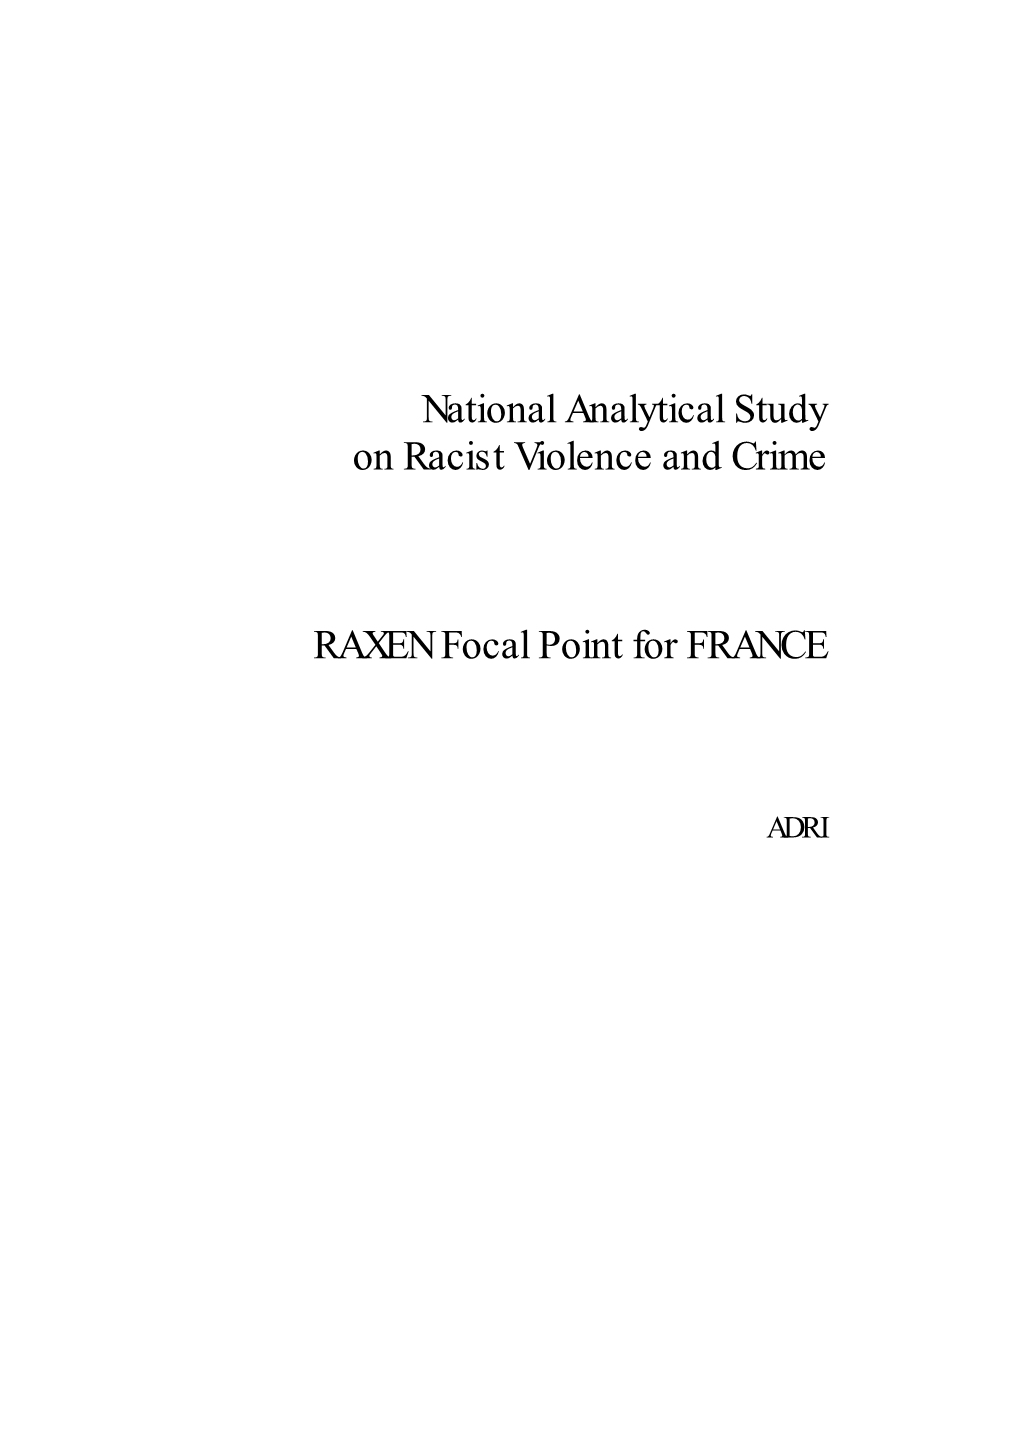 National Analytical Study on Racist Violence and Crime RAXEN Focal Point for FRANCE